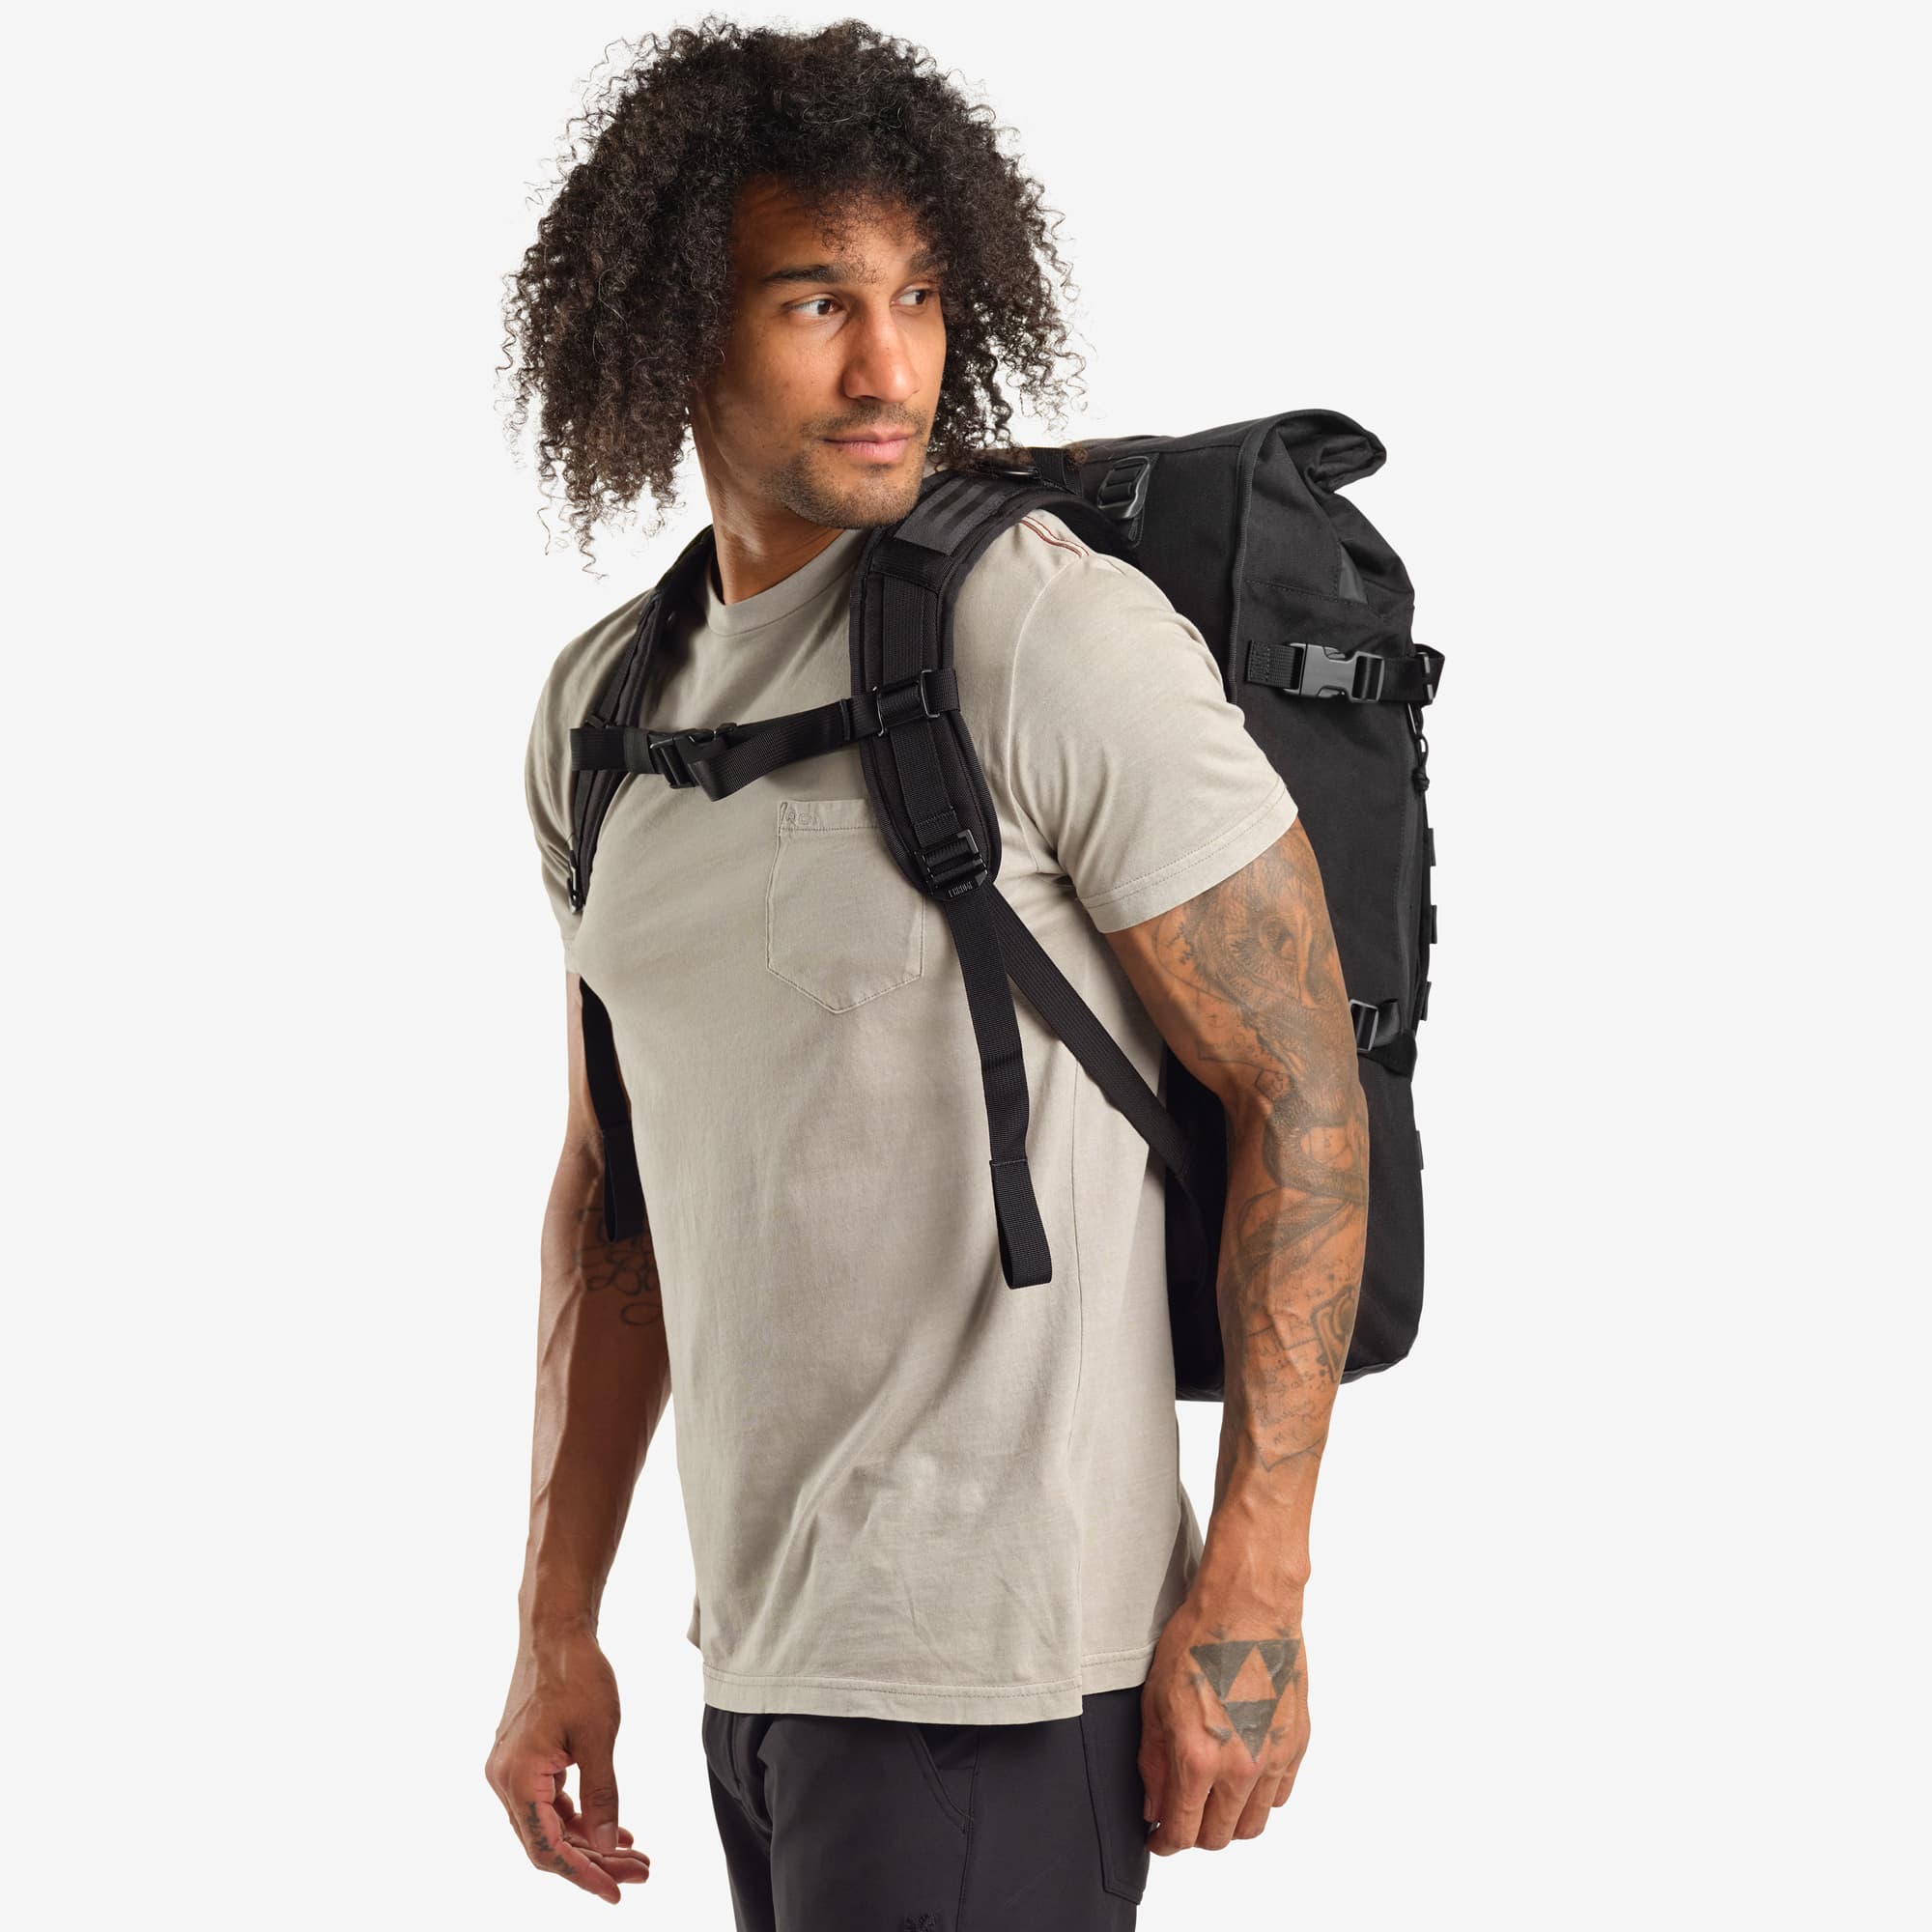 Black Barrage Freight Backpack on a person front view